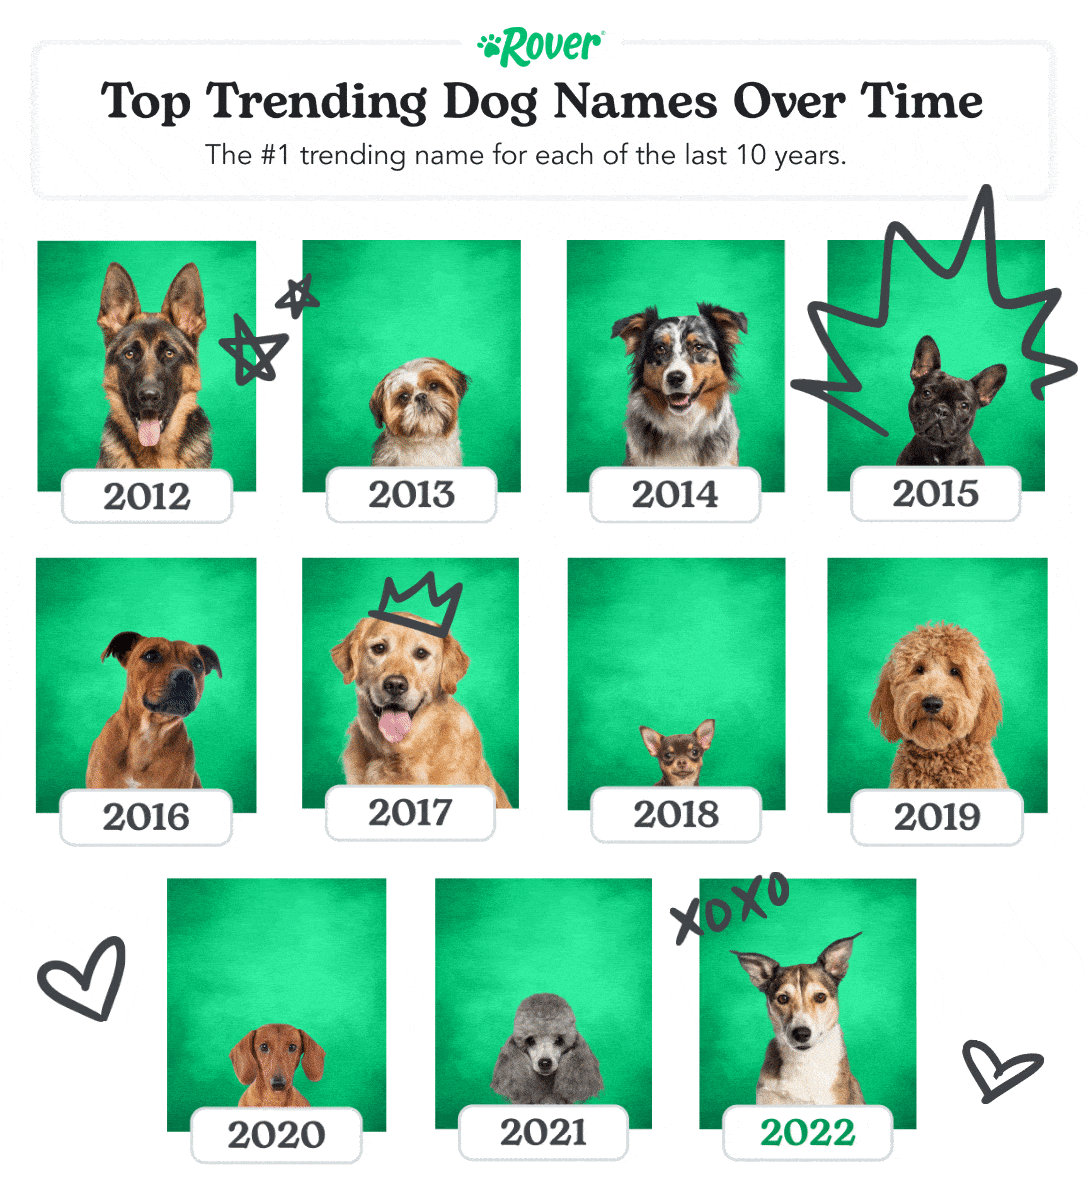 Top Trending Dog Names Over Time: The #1 trending name for each of the last 10 years.